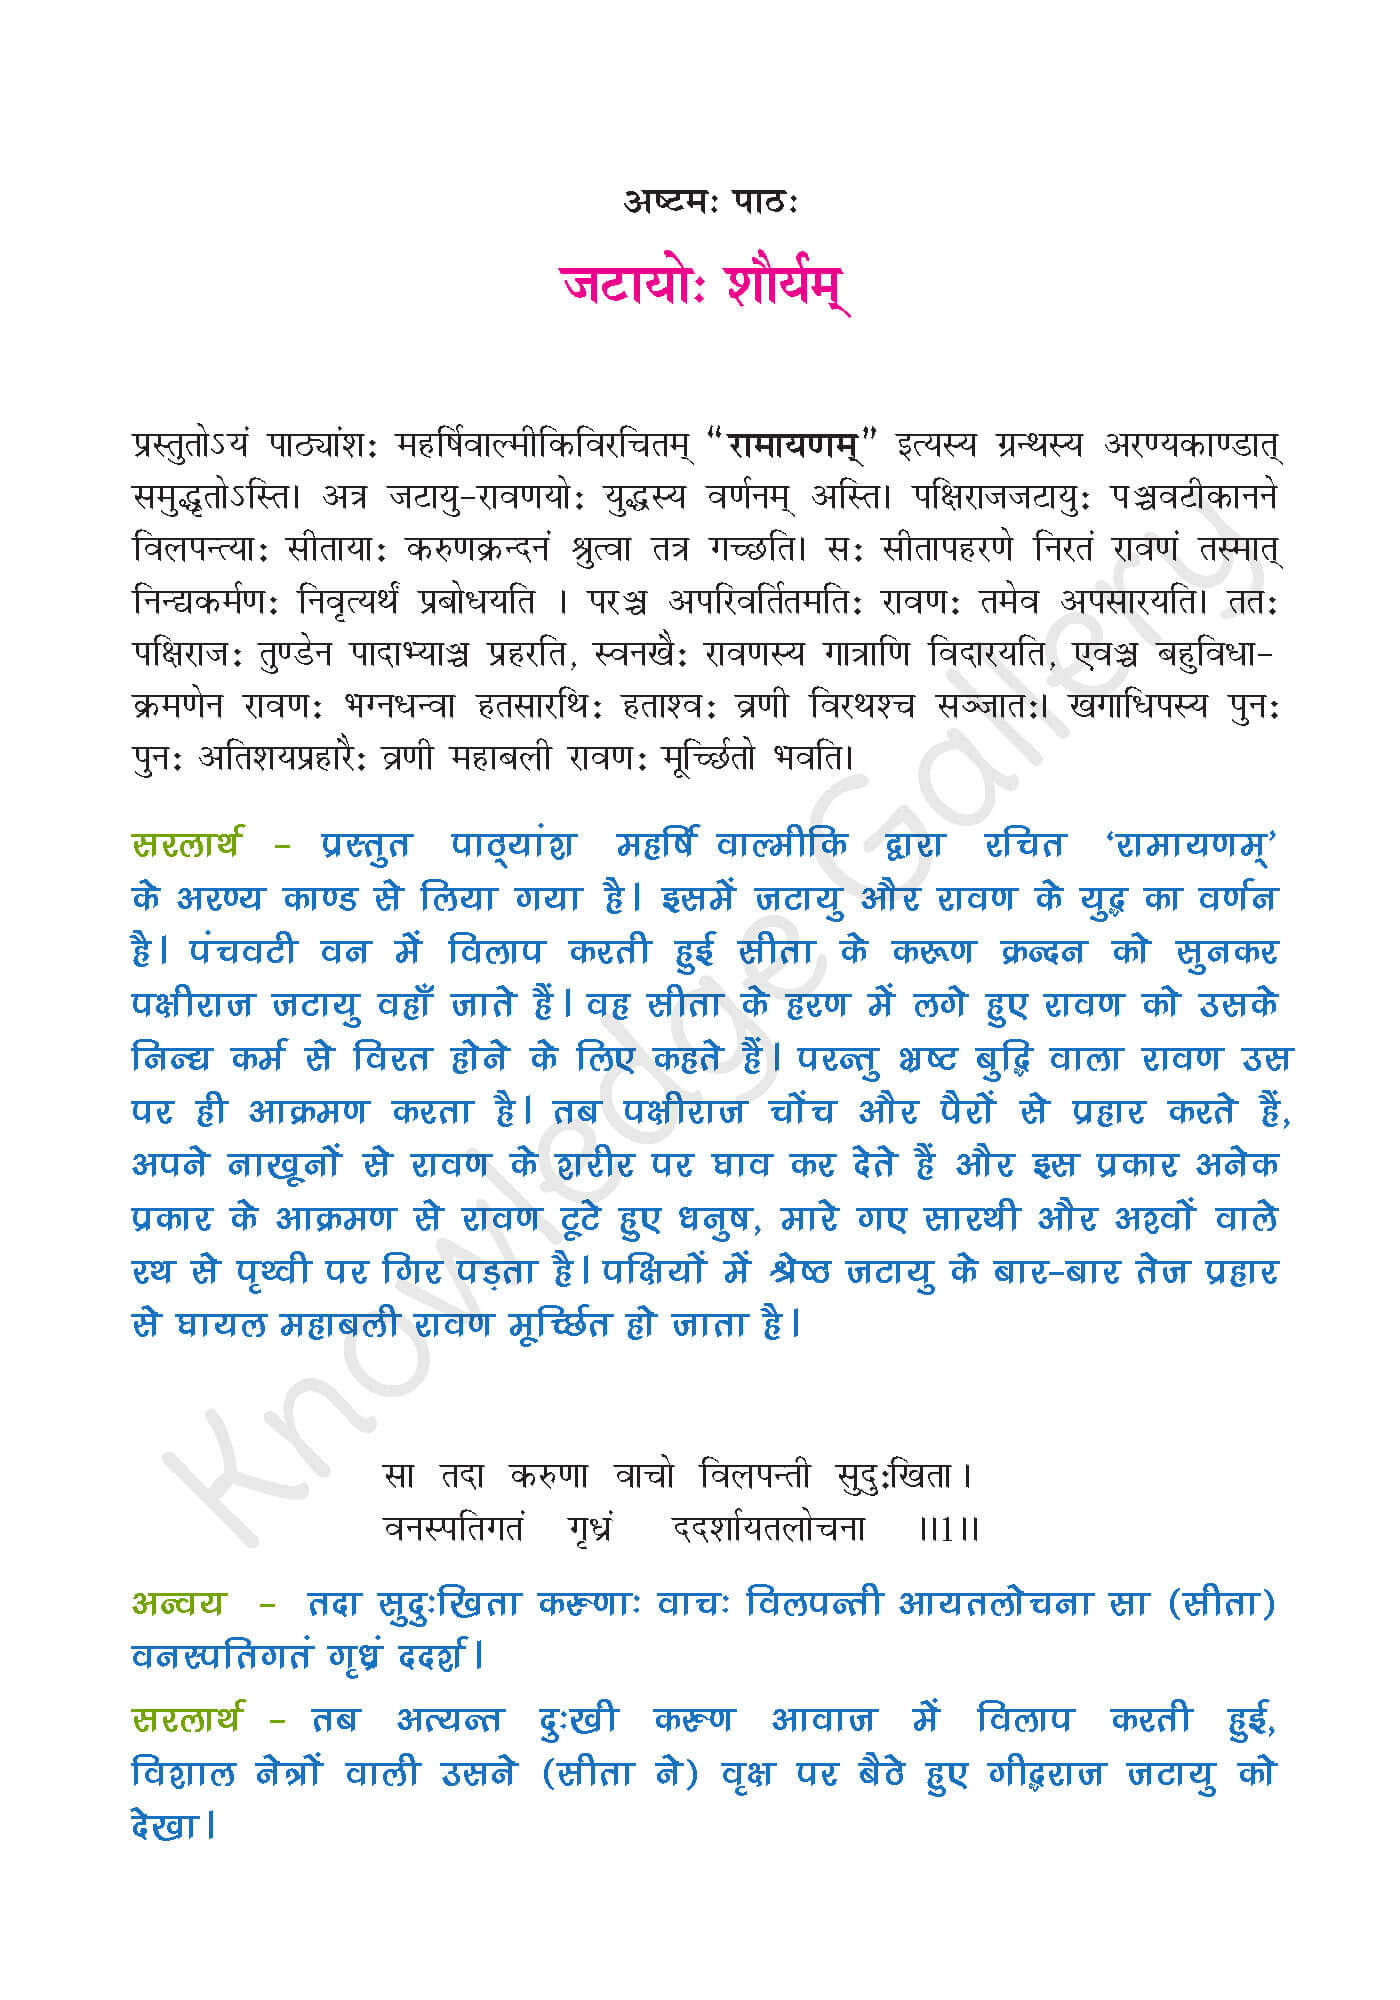 NCERT solutions for class 9 Hindi Updated 2023-24